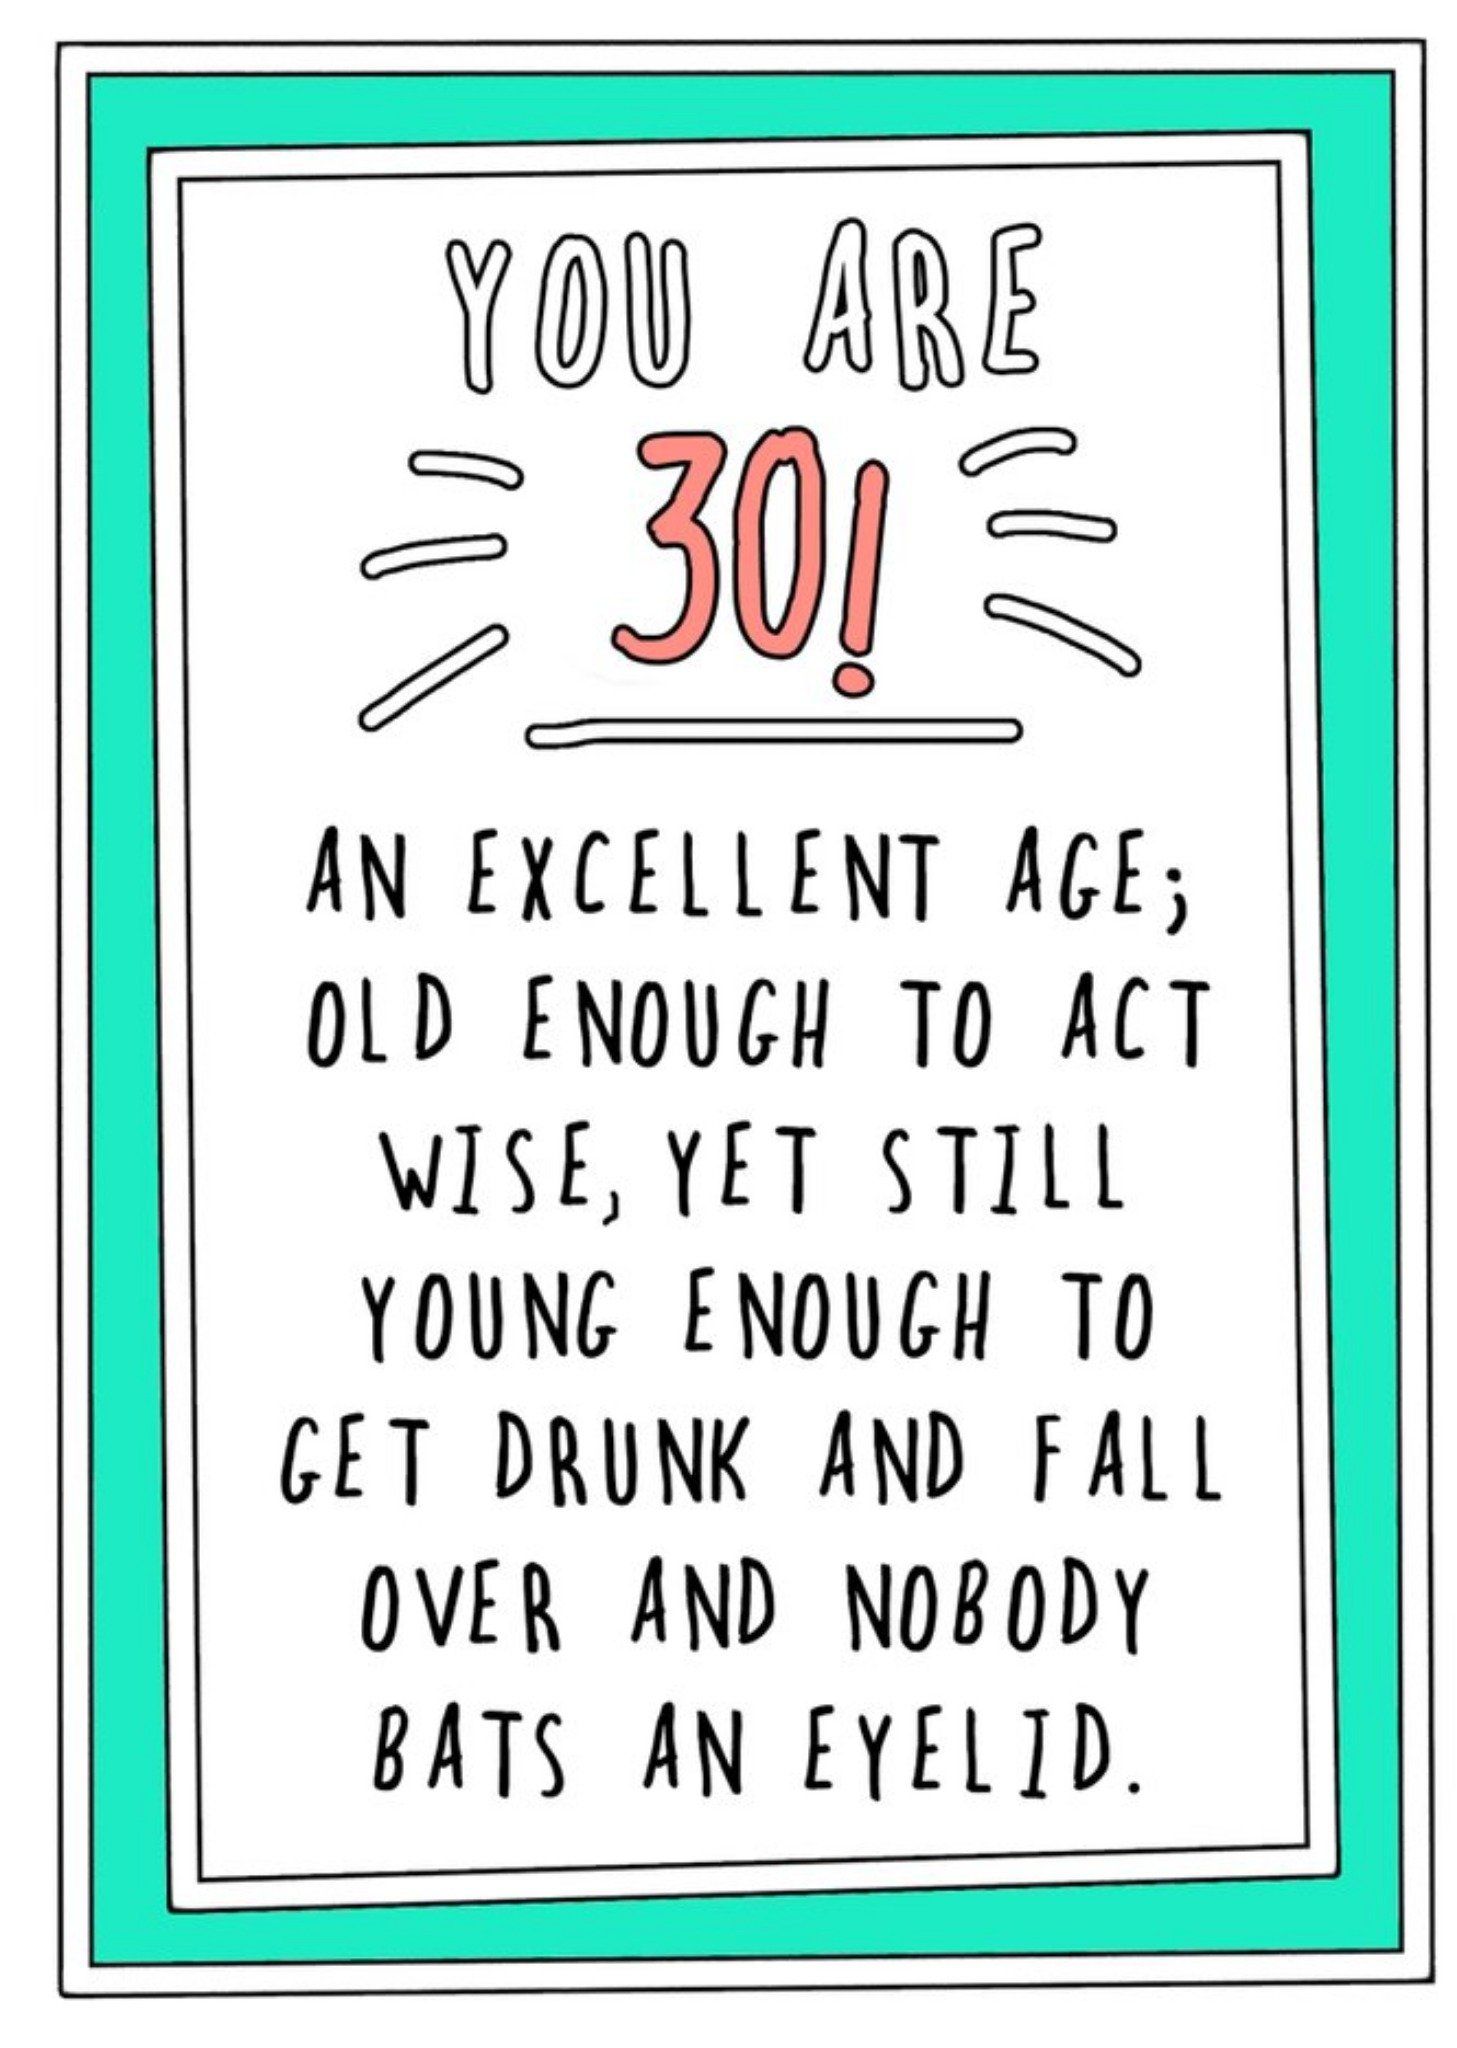 Go La La Funny Cheekyyou Are 30 An Excellent Age Old Enough To Act Wise Yet Still Young Enoughto Get